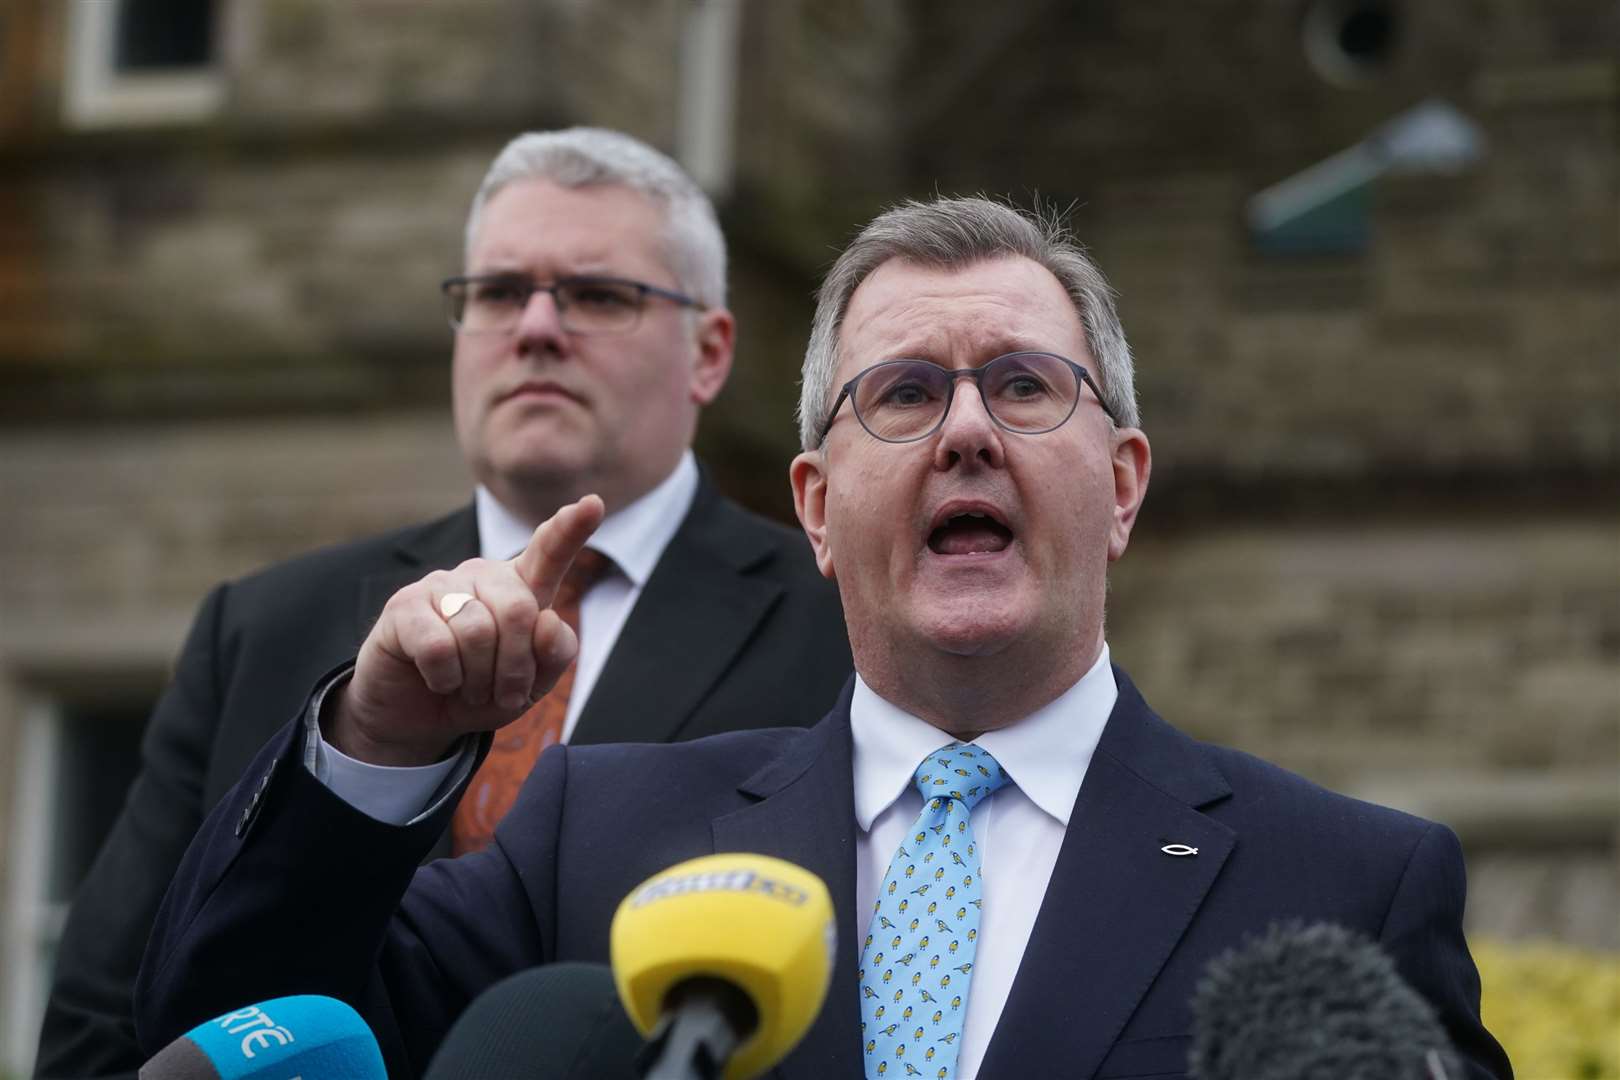 DUP leader Sir Jeffrey Donaldson collapsed the powersharing executive two years ago in protest at post-Brexit trading arrangements (Brian Lawless/PA)